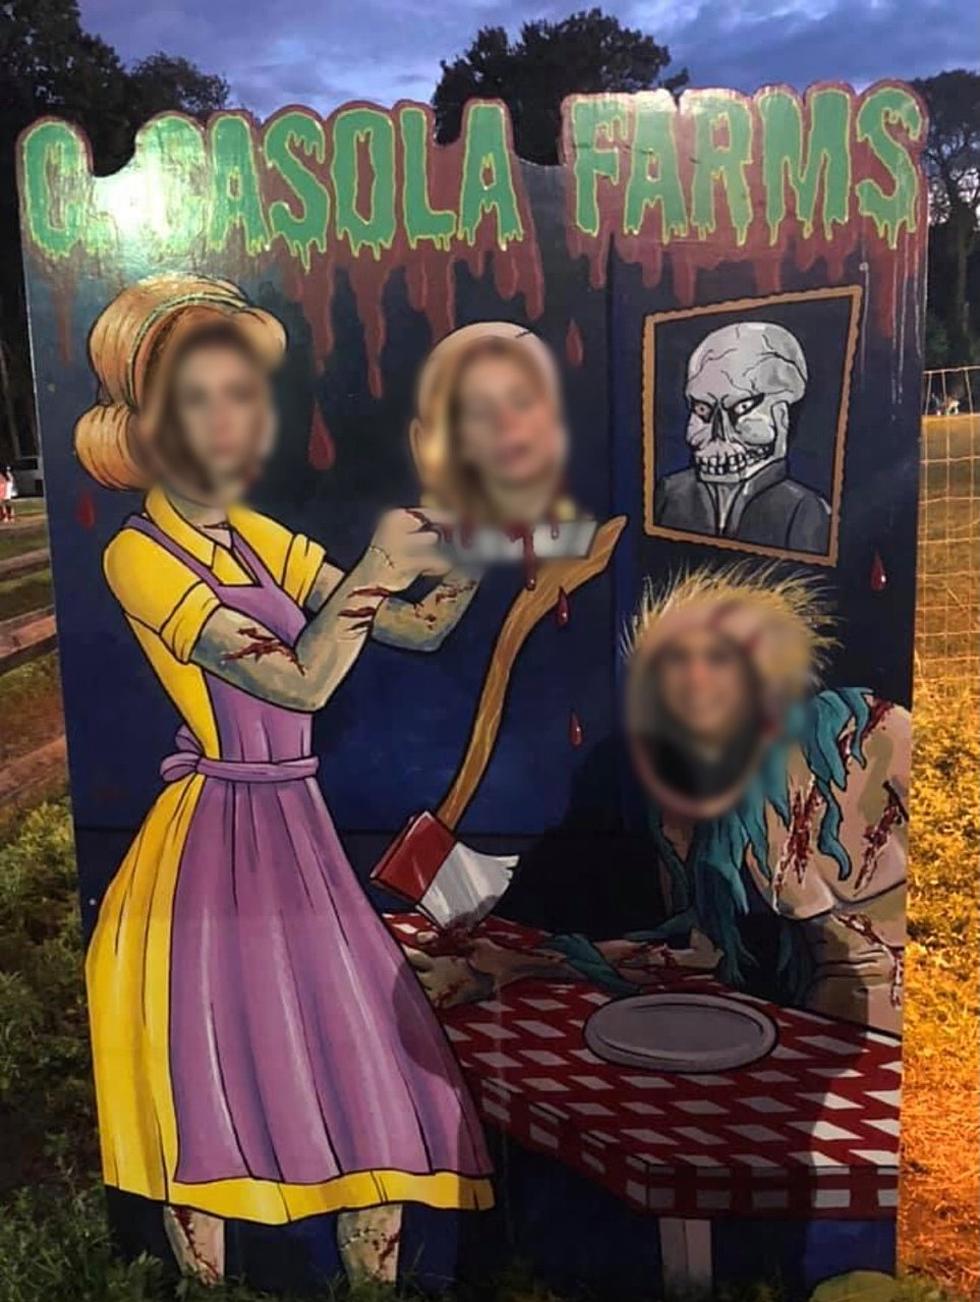 Boo! This New Jersey Haunted Hayride Will Scare You